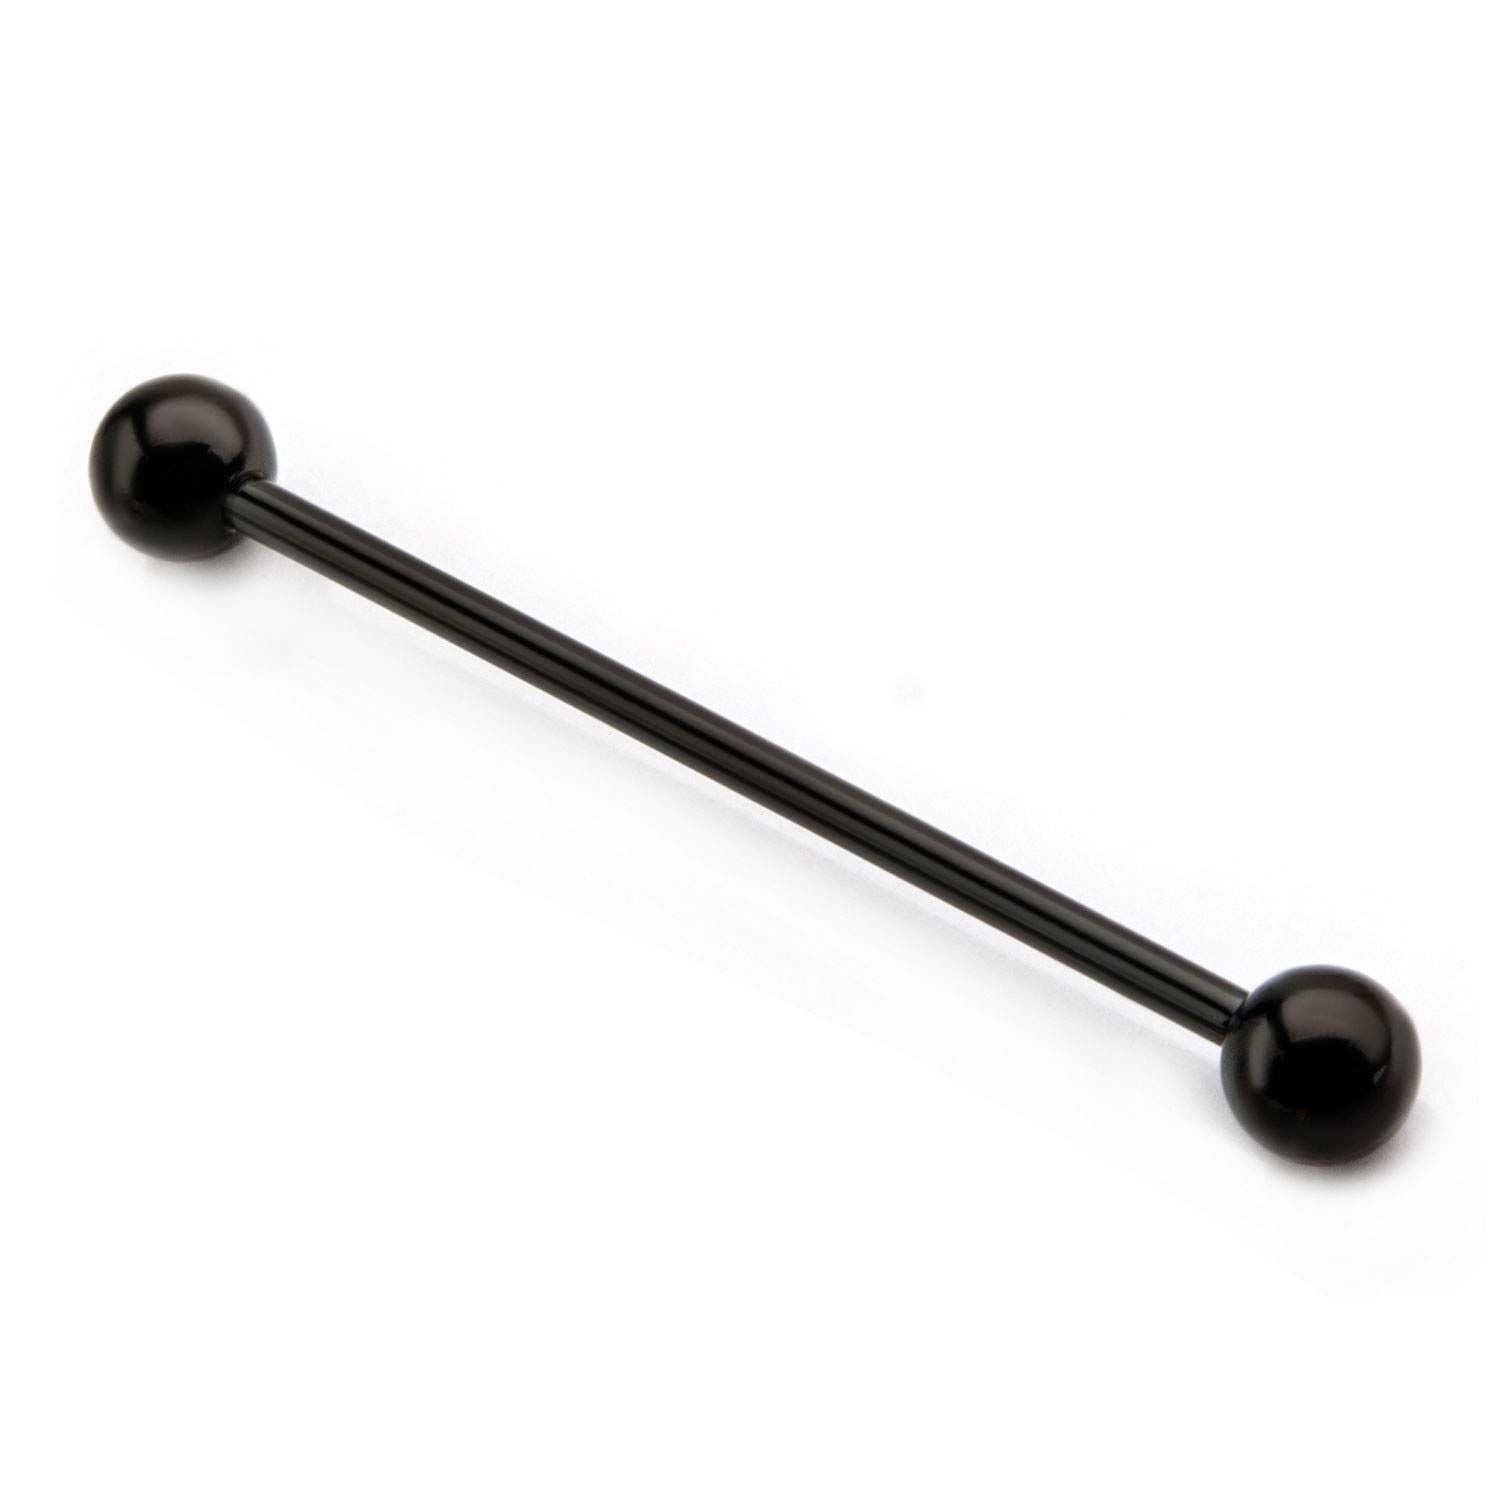 Indistrial Barbell 14g 1 3/8" Black Titanium Plated Industrial Barbell 5mm Ball ends -Rebel Bod-RebelBod